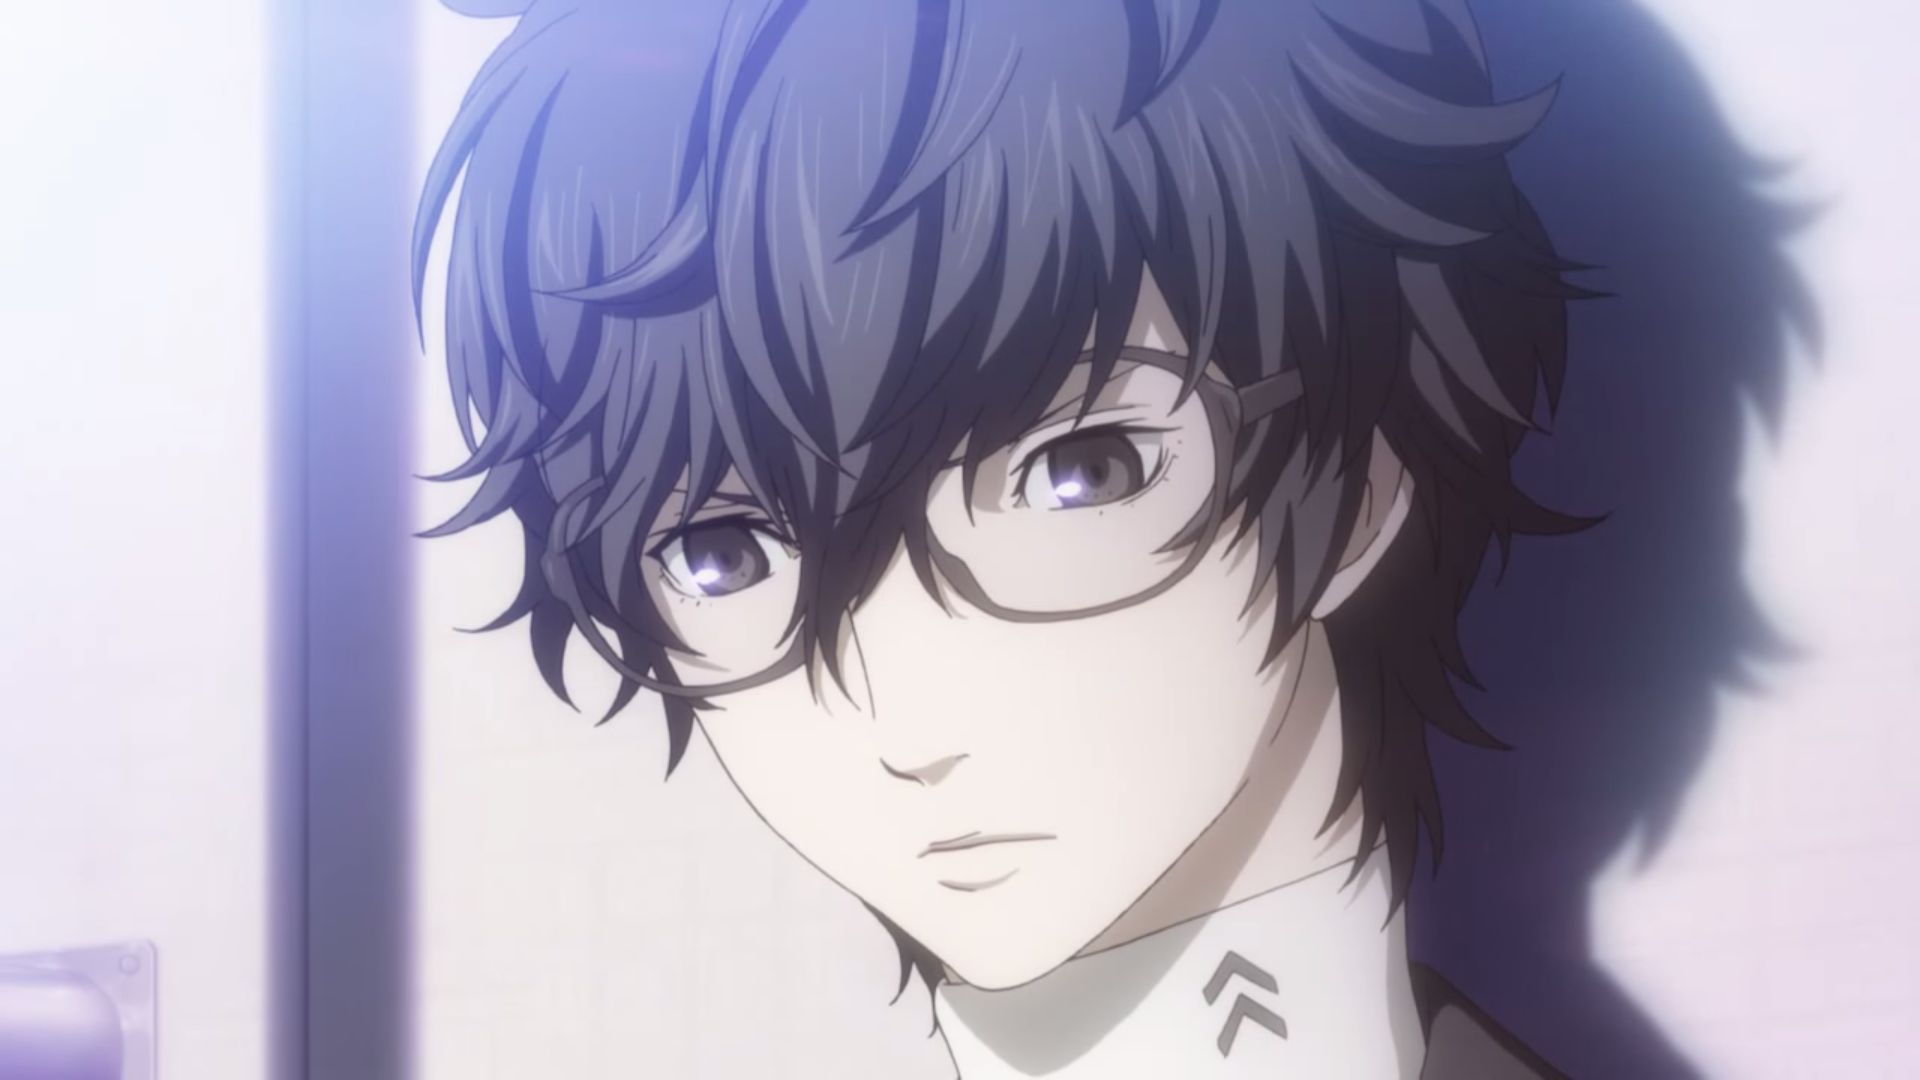 Persona 5's Anime Cutscenes Are Made by Production 